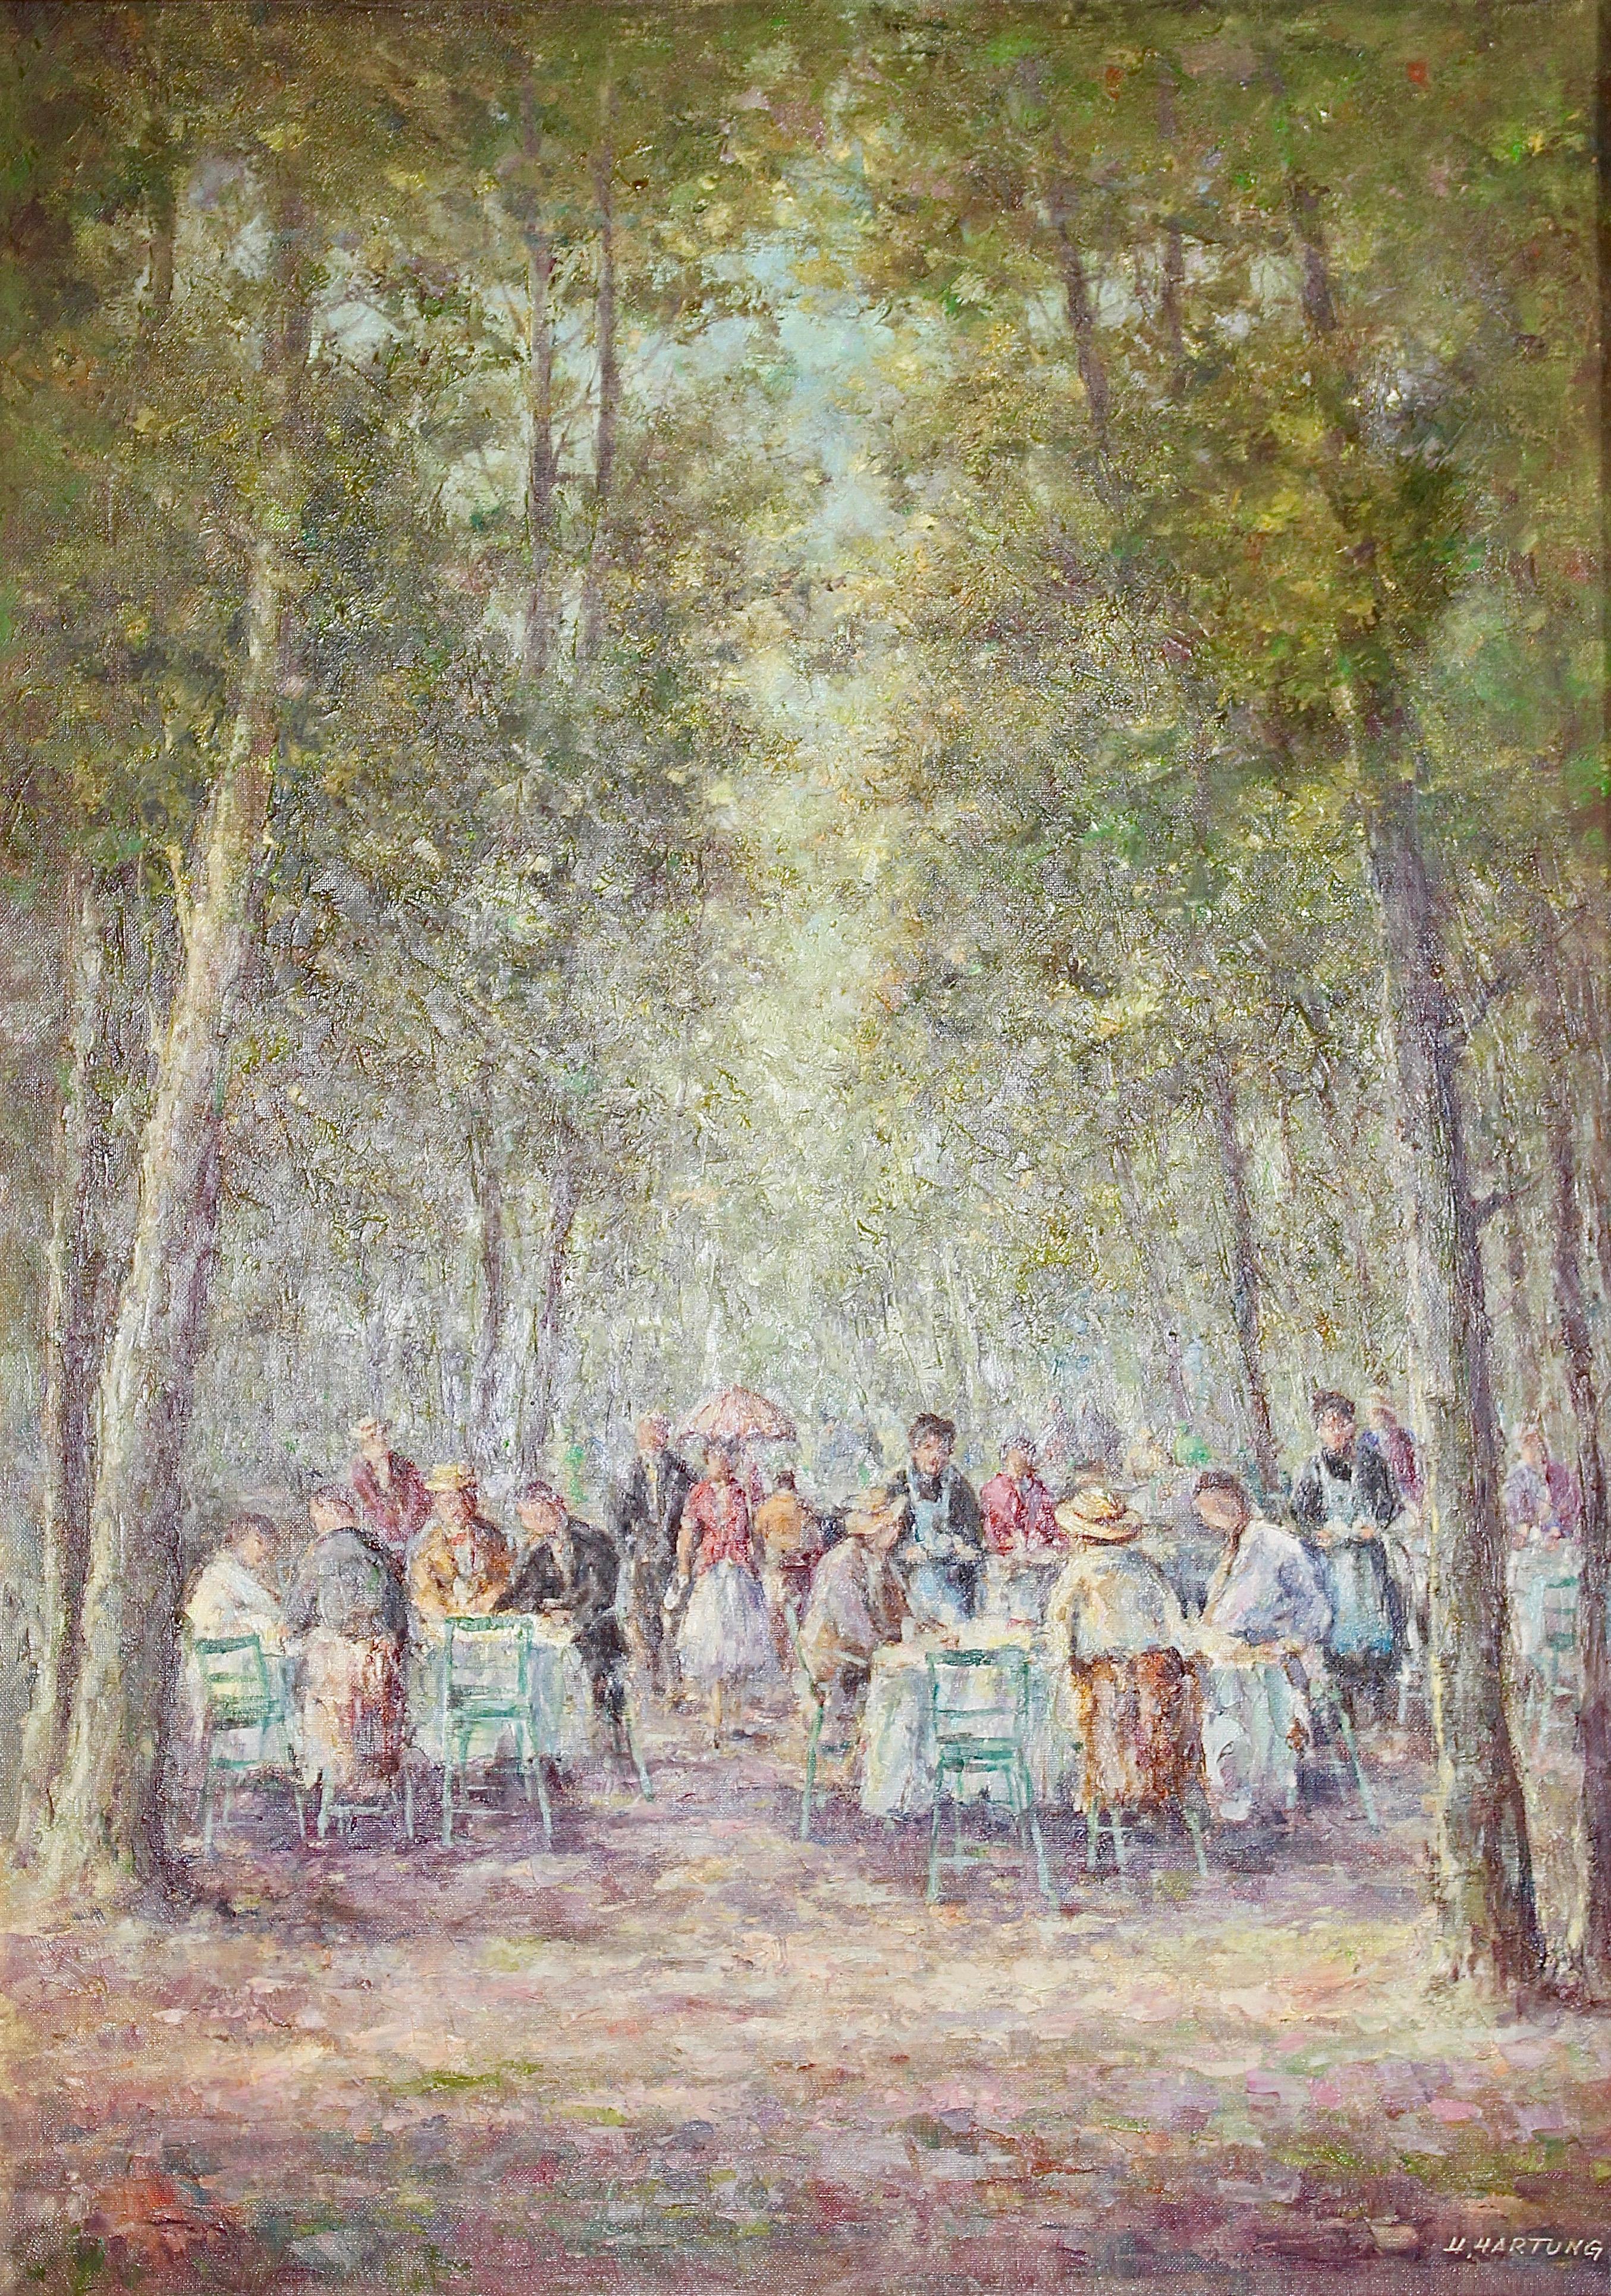 Decorative, romantic oil painting by Heinrich Hartung "Dinner in the Park".